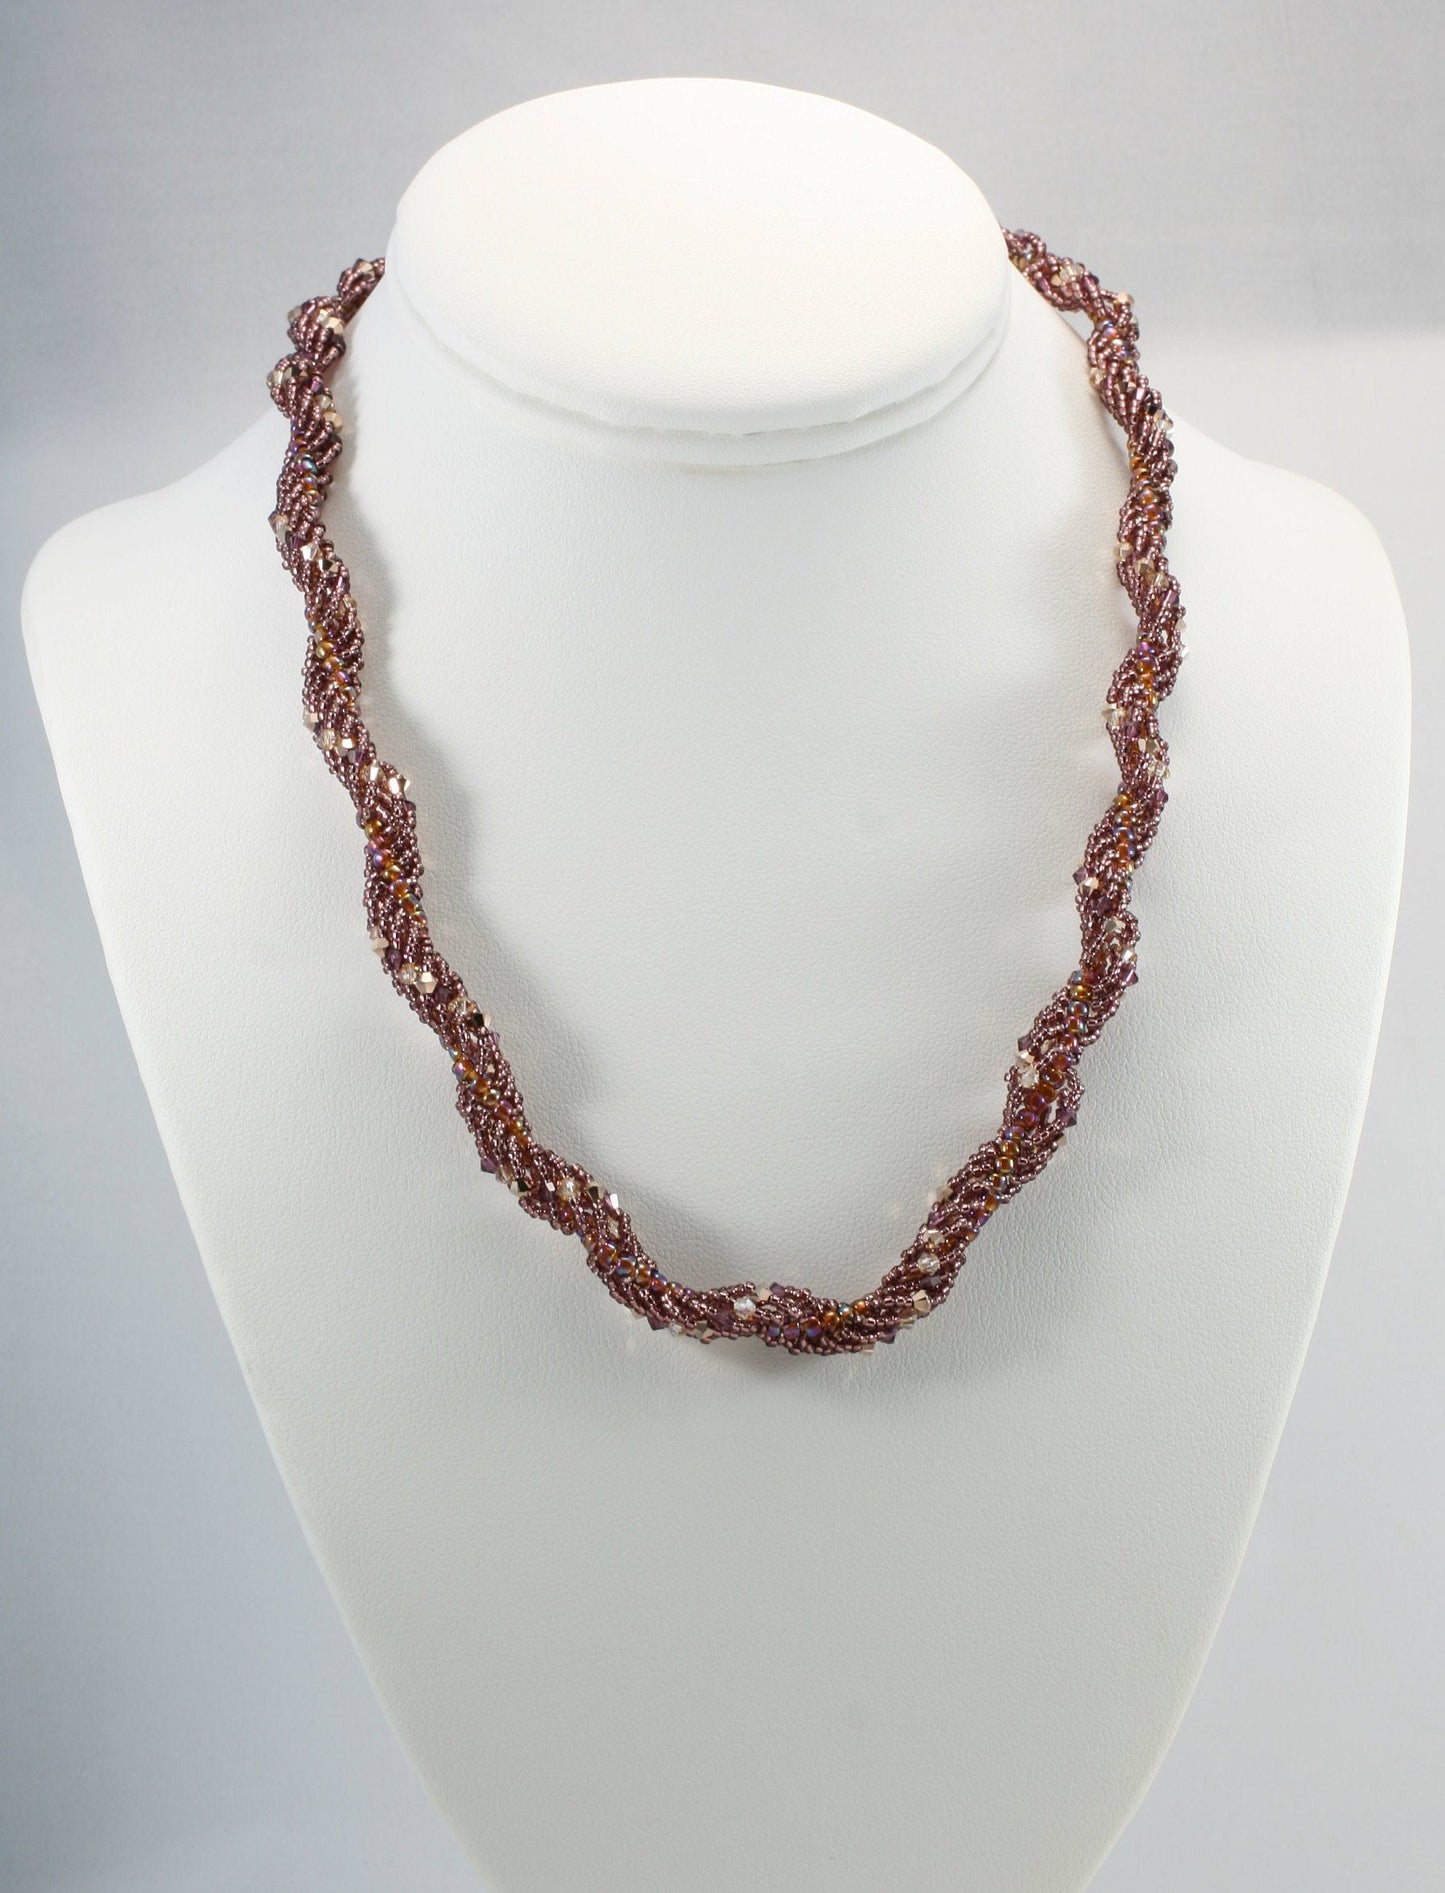 Lavender Spiral Rope Beaded Necklace with Toggle Clasp